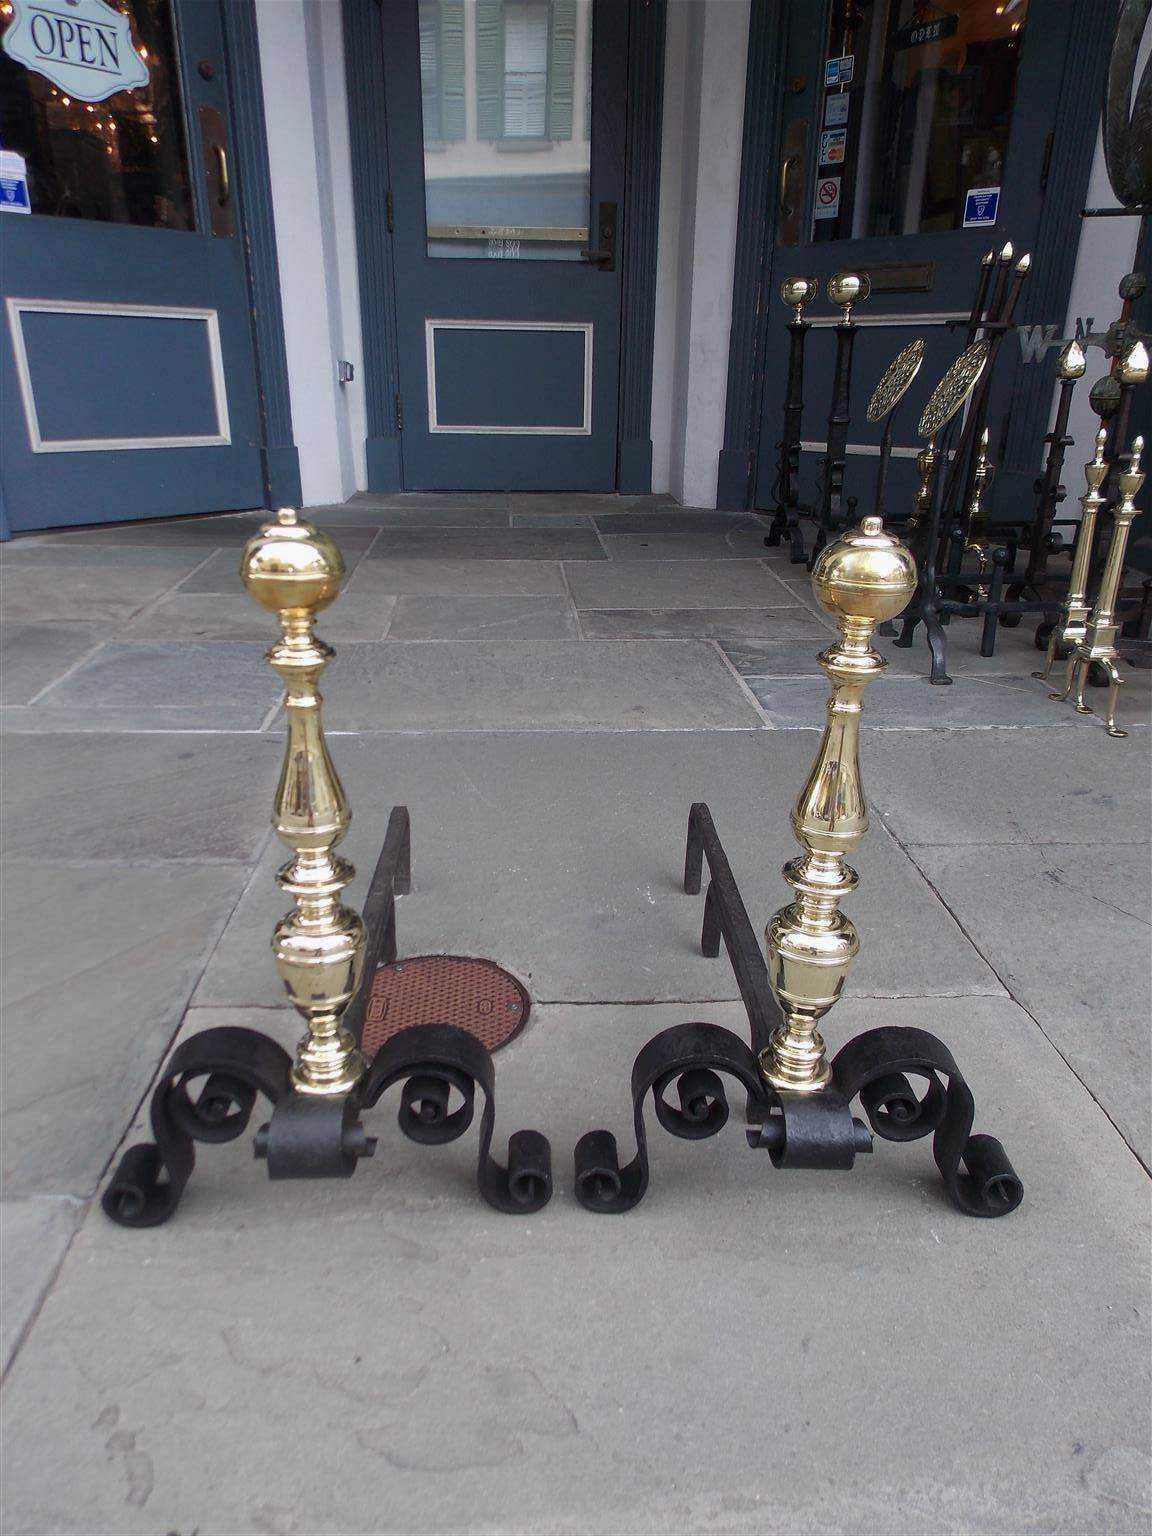 Pair of American brass and wrought iron andirons with ball ringed finials, turned bulbous centered columns, spit hooks, and terminating on scrolled decorative legs, Mid-19th century.